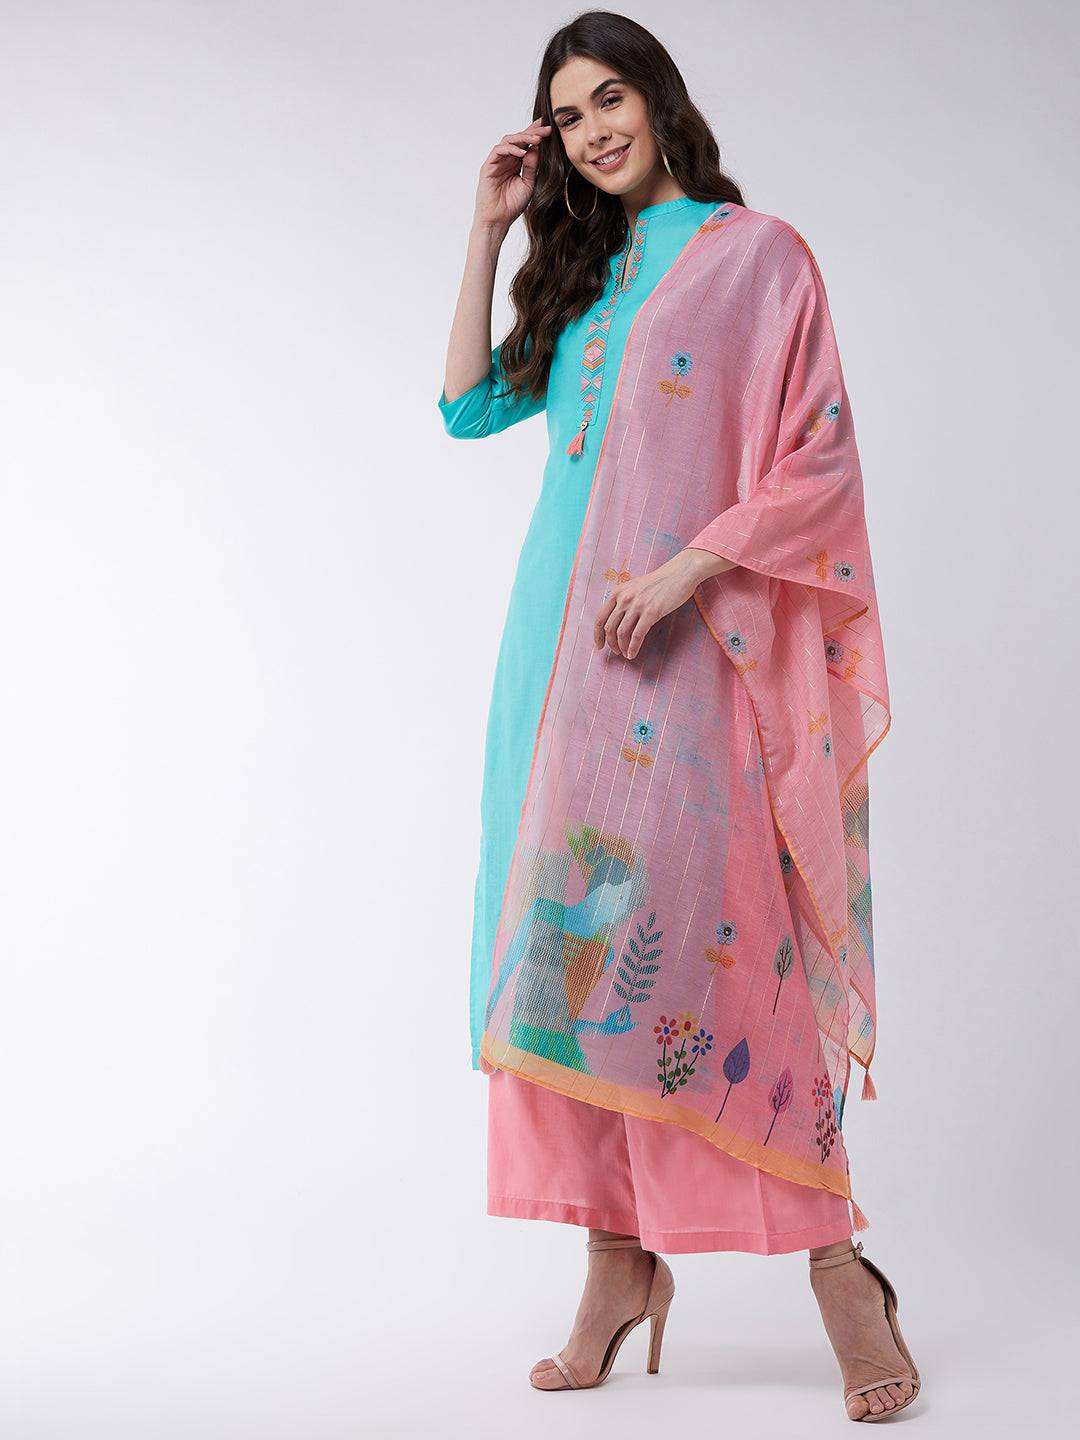 Blue Embroidered Kurta With Pants And Pink Digital Printed Dupatta